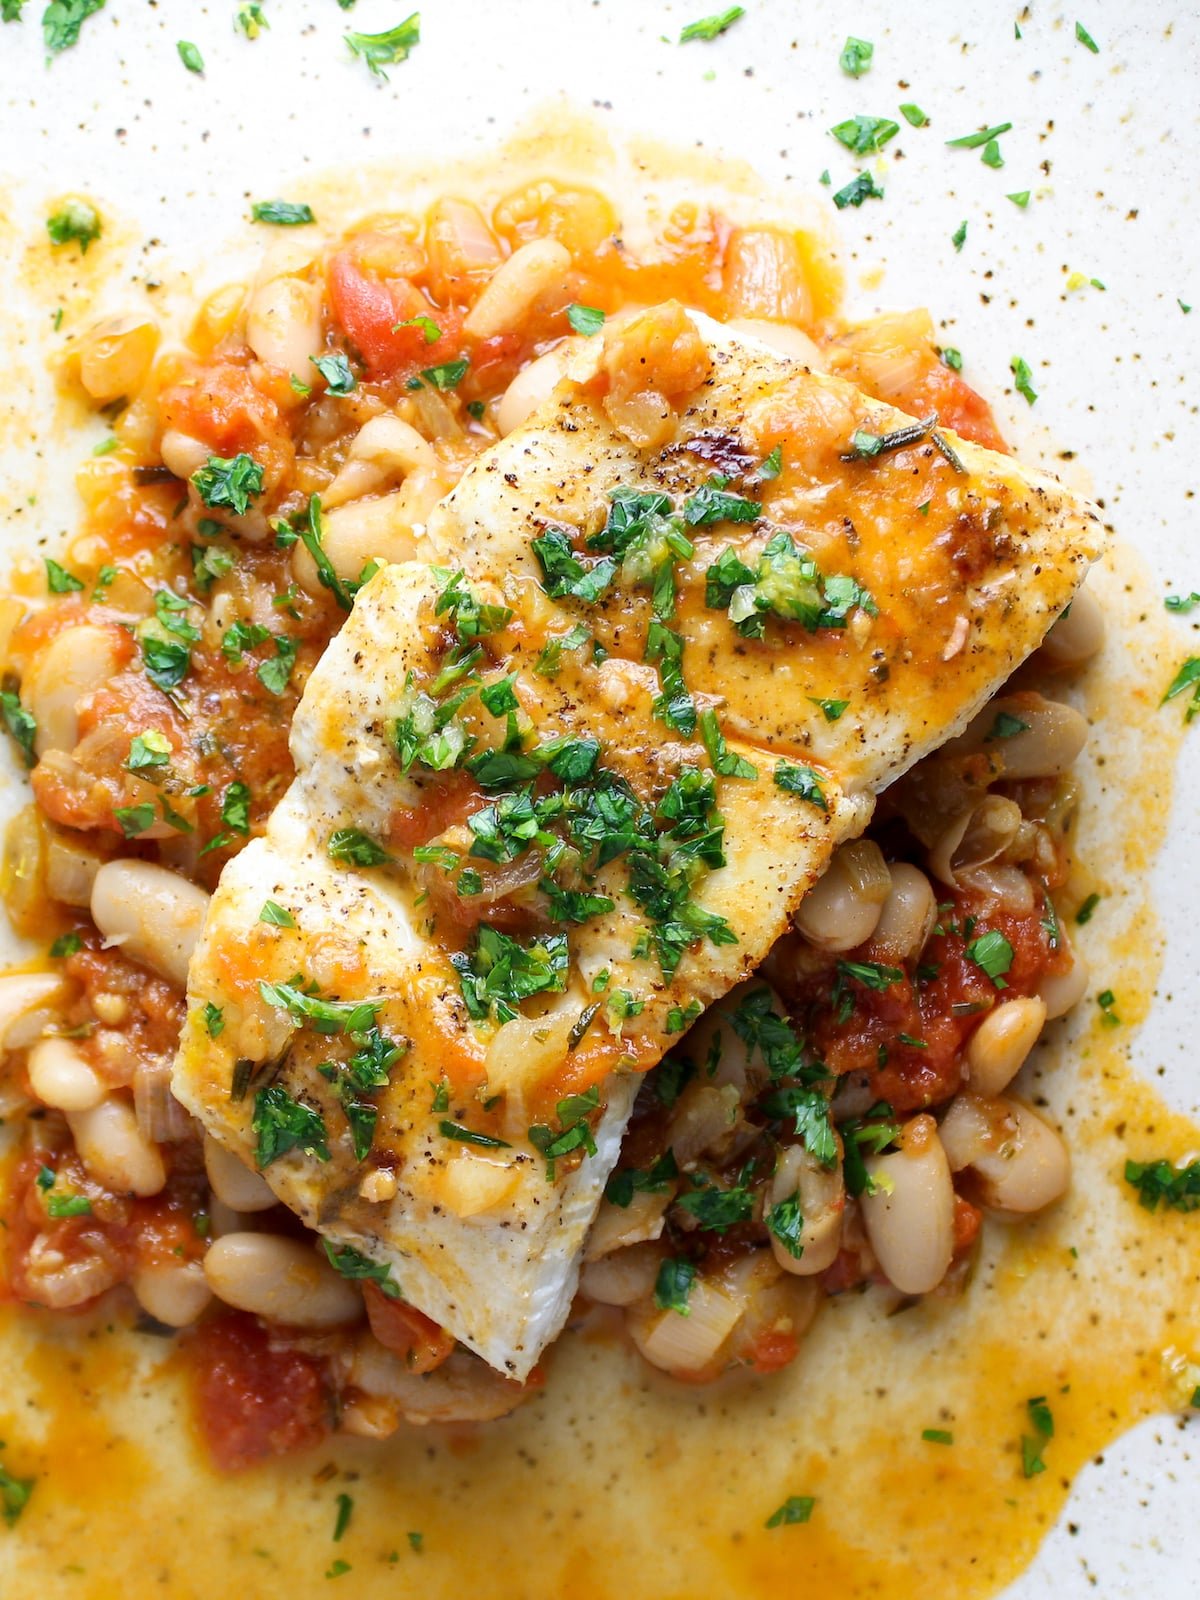 Cooked halibut on a plate with sauteed cannellini beans.